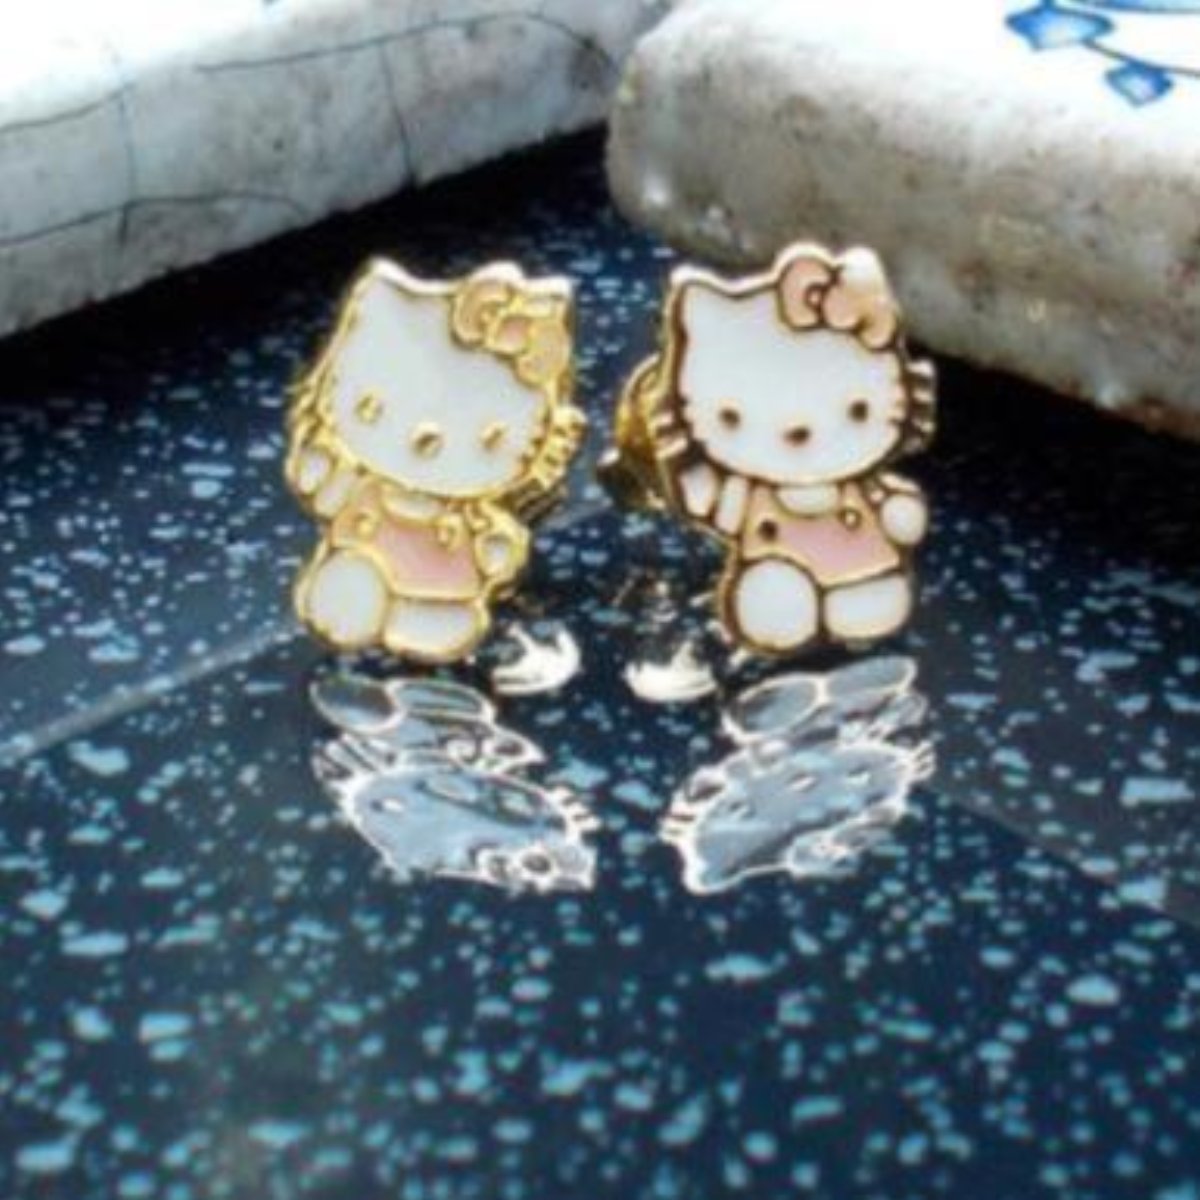 18ct Gold Plated 'Hello Kitty' Stud Earrings